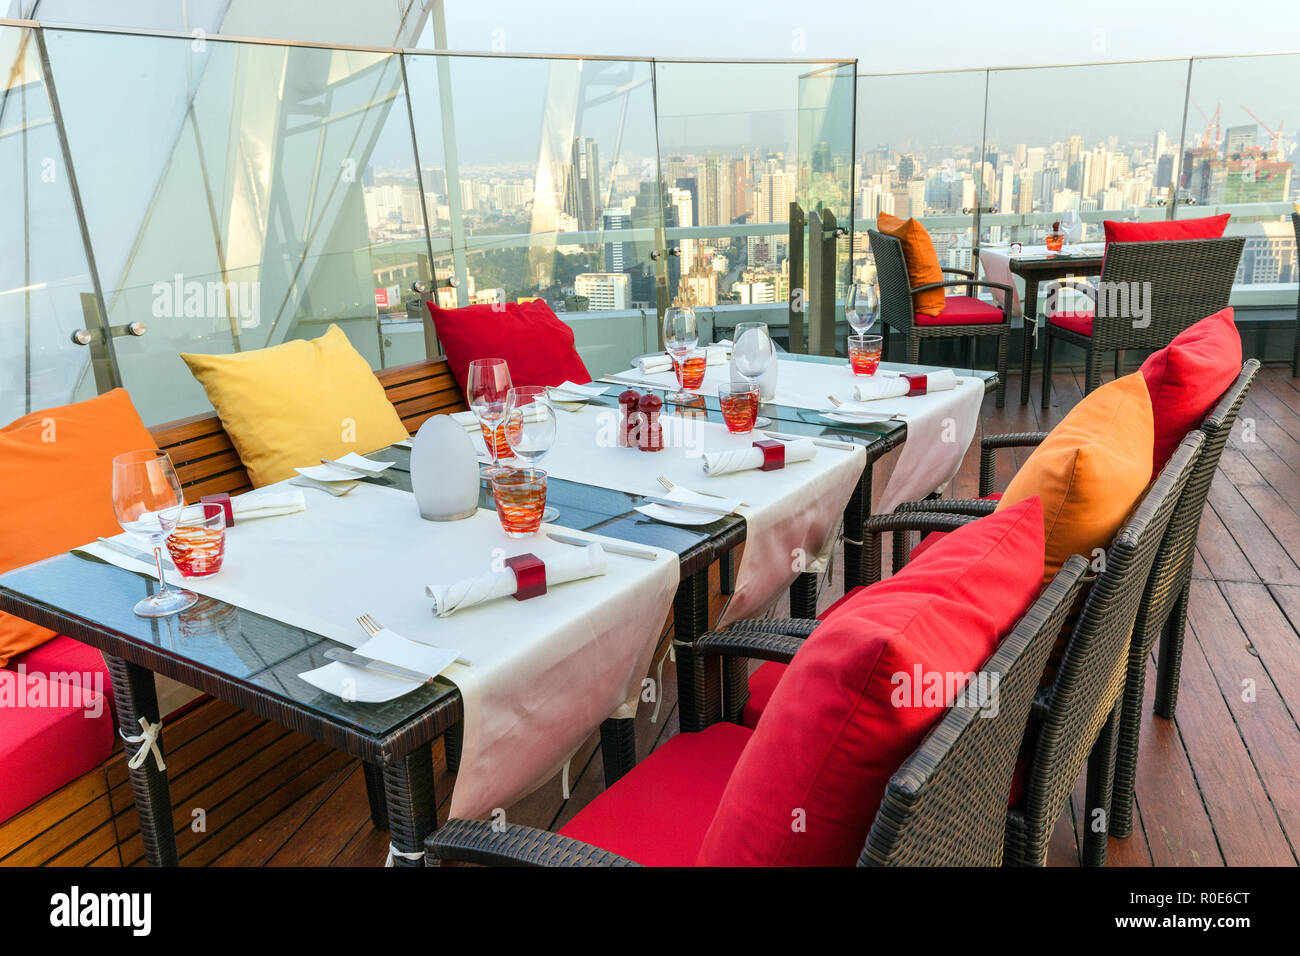 BANGKOK, THAILAND, JANUARY 14, 2015: Restaurant table with view on the cityscape at the Red Sky Rooftop of the Centara hotel in Bangkok, Thailand. Stock Photo